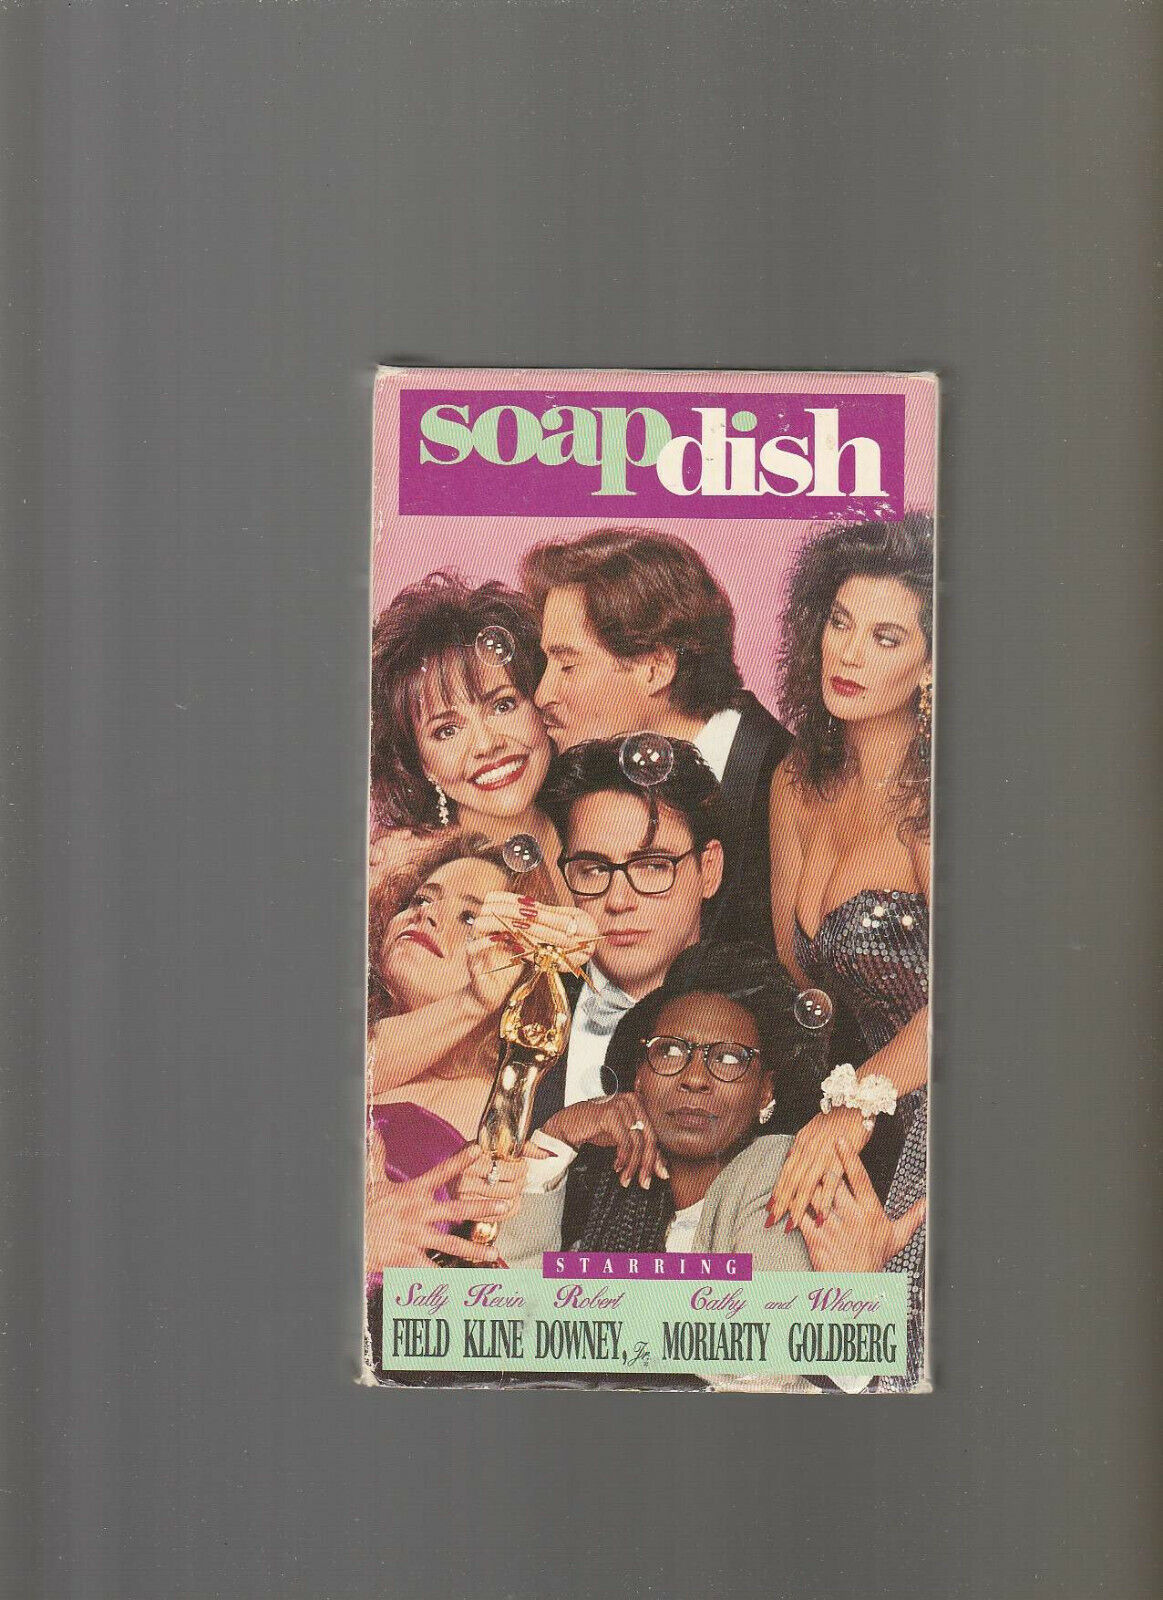 Primary image for Soapdish (VHS, 1991)